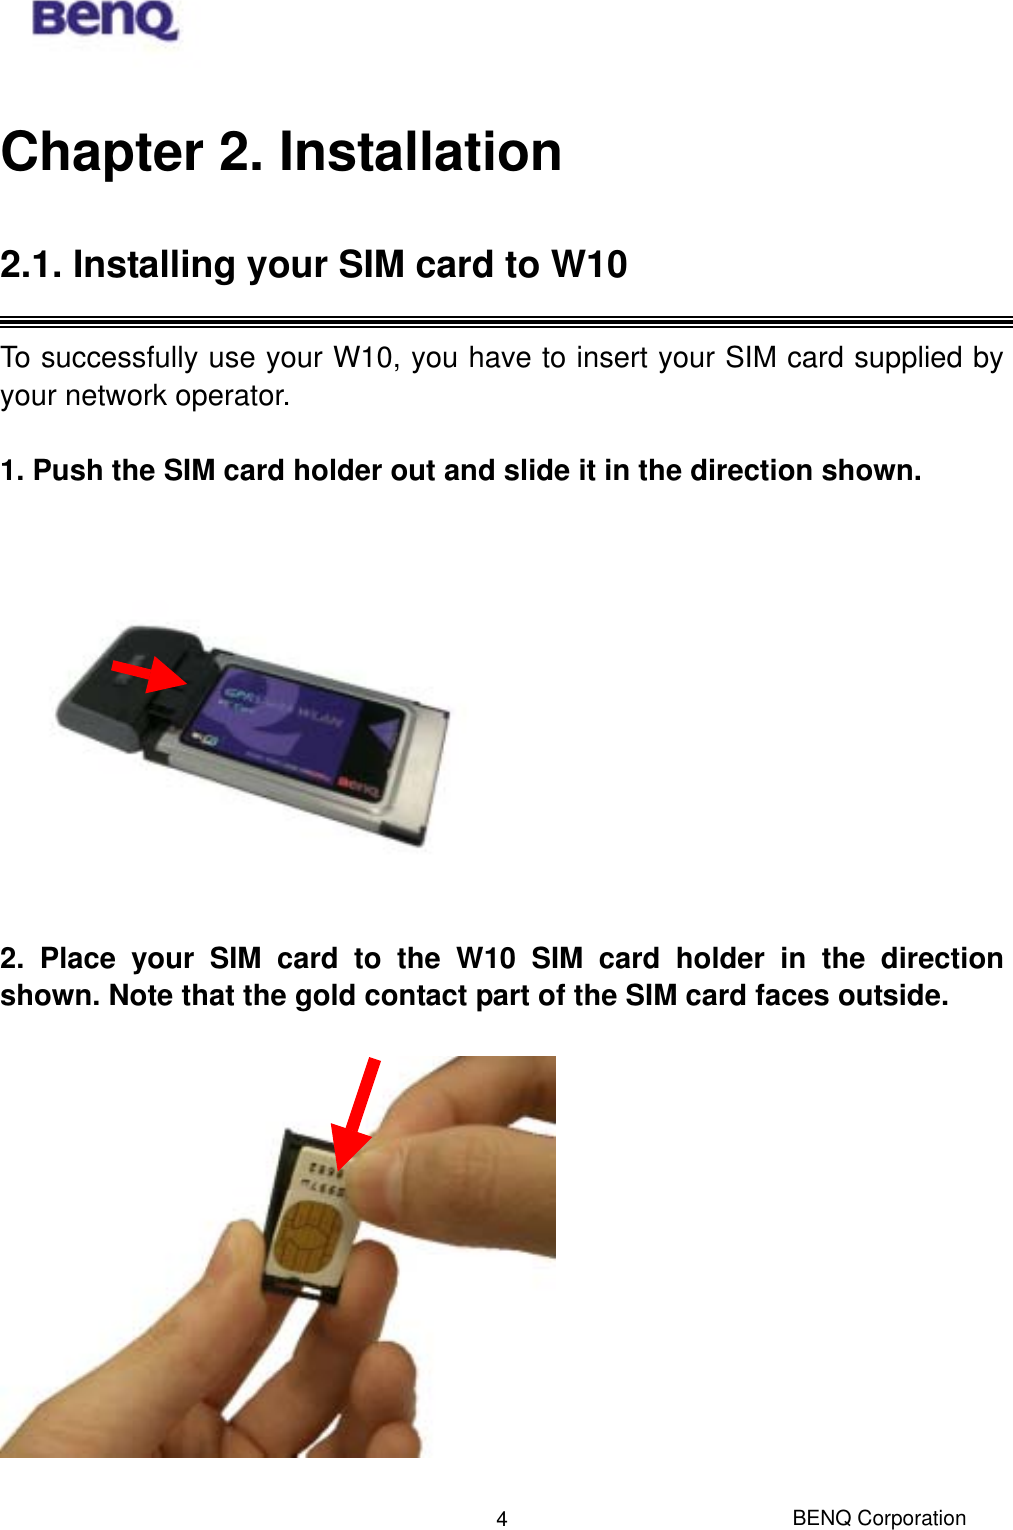  Chapter 2. Installation 2.1. Installing your SIM card to W10  To successfully use your W10, you have to insert your SIM card supplied by your network operator.  1. Push the SIM card holder out and slide it in the direction shown.    2. Place your SIM card to the W10 SIM card holder in the direction shown. Note that the gold contact part of the SIM card faces outside.    BENQ Corporation 4